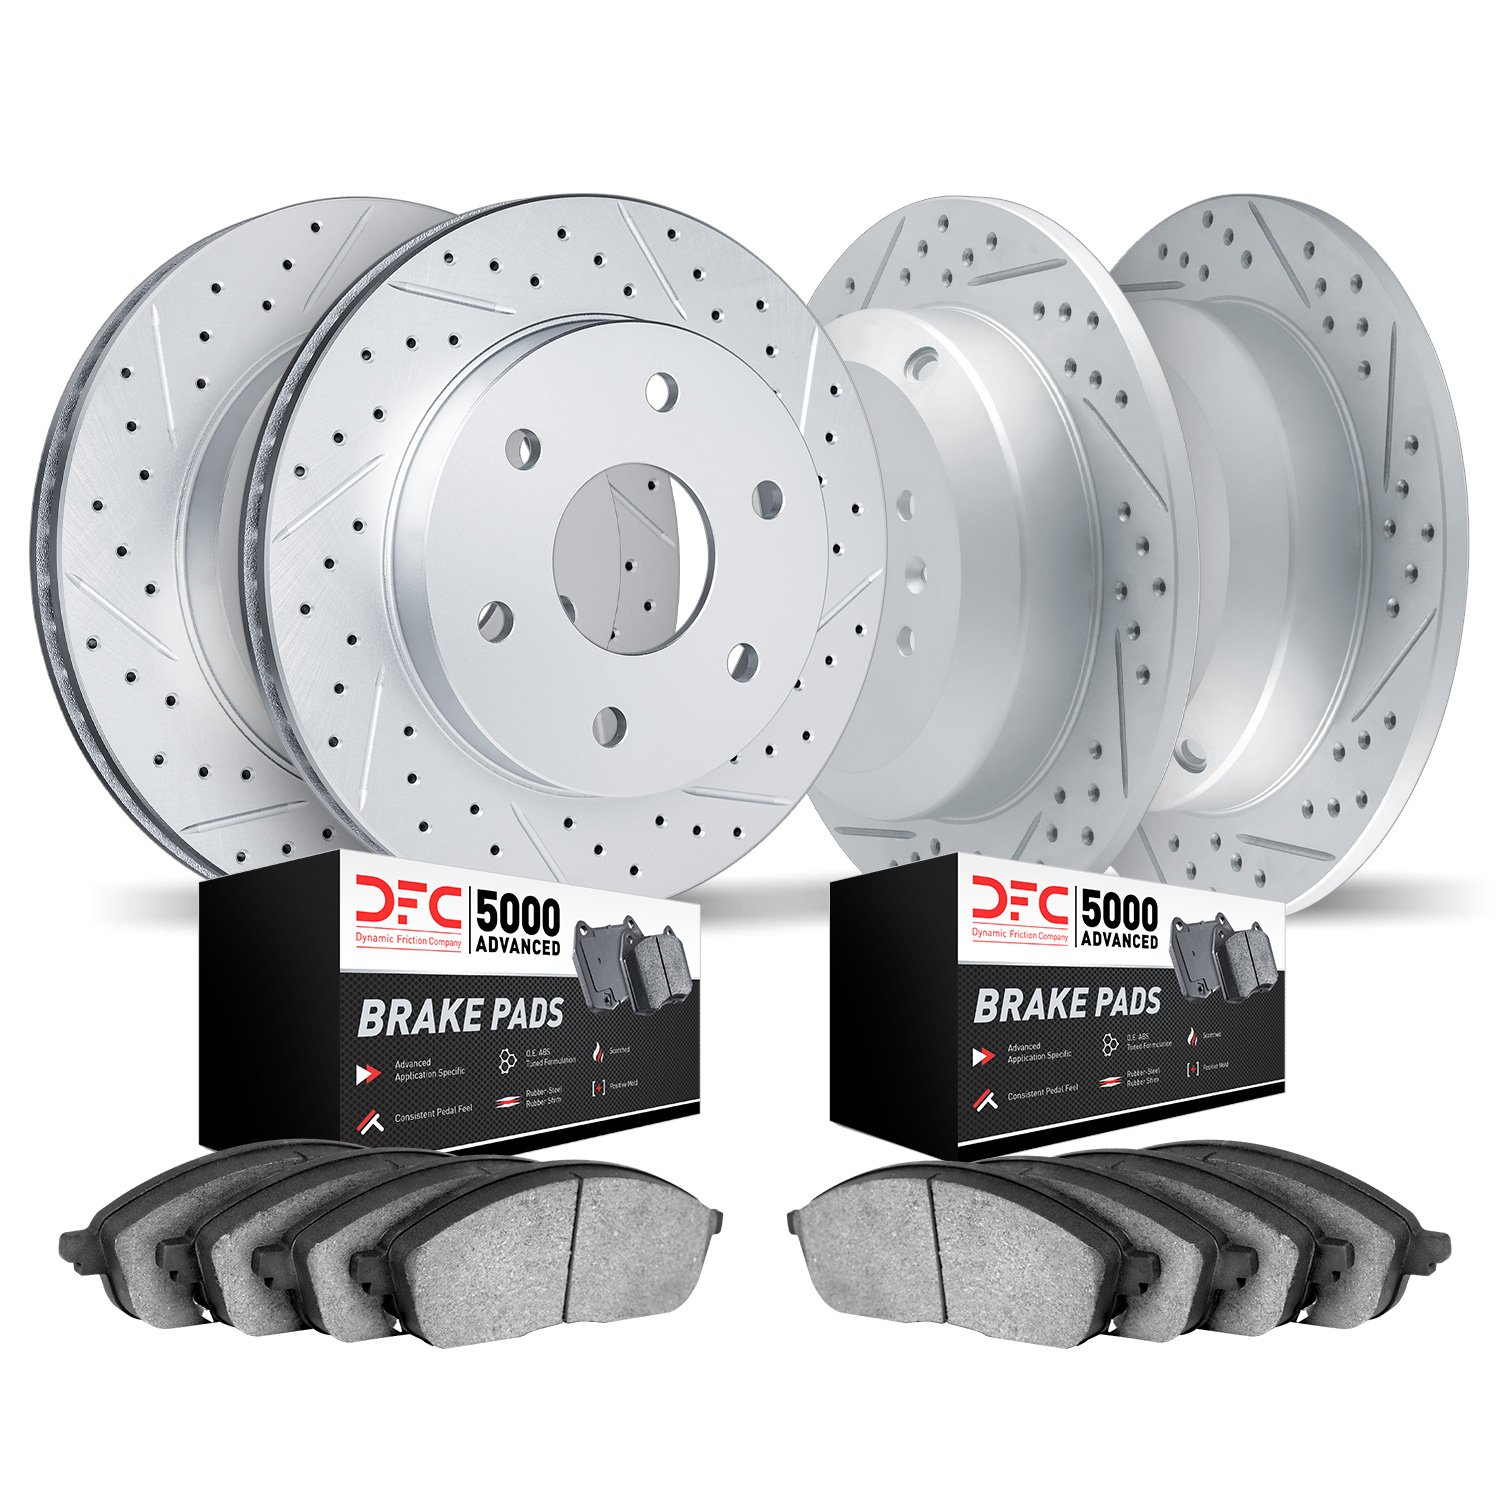 2504-40088 Geoperformance Drilled/Slotted Rotors w/5000 Advanced Brake Pads Kit, 2007-2017 Multiple Makes/Models, Position: Fron